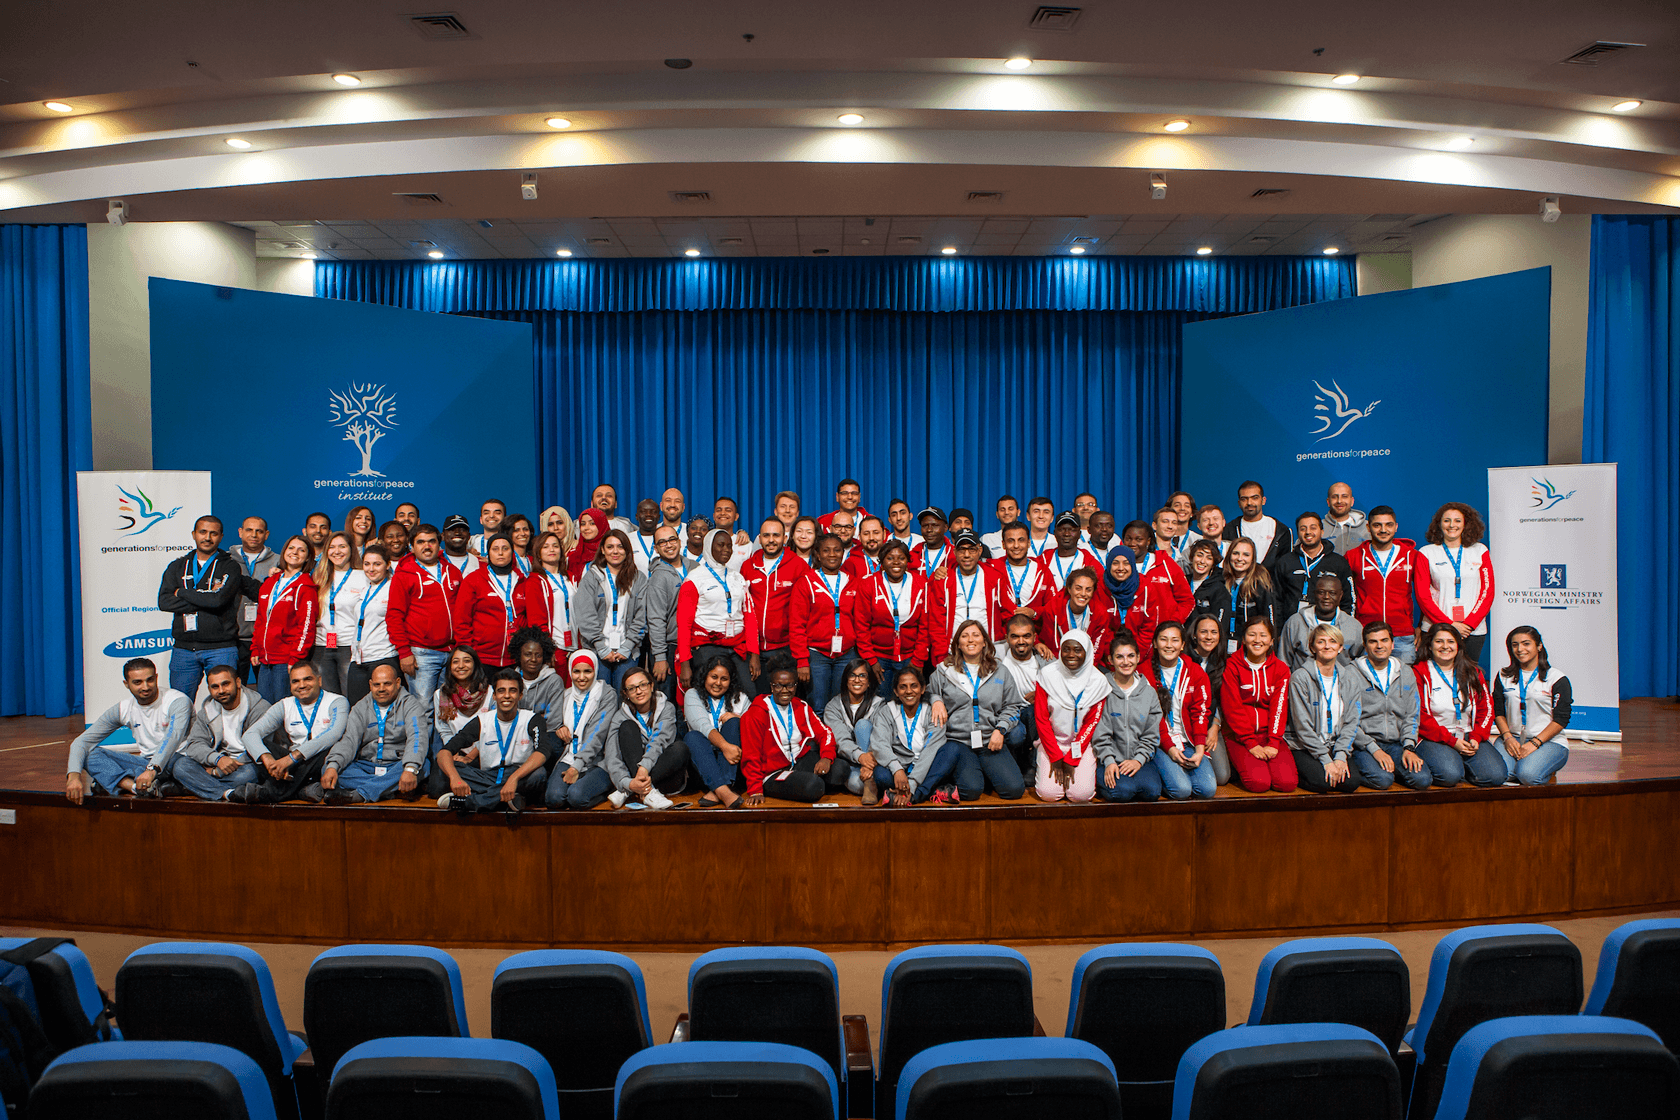 Generations-for-peace-AT15-Samsung-advanced-training-Group-Photo-2015-delegates